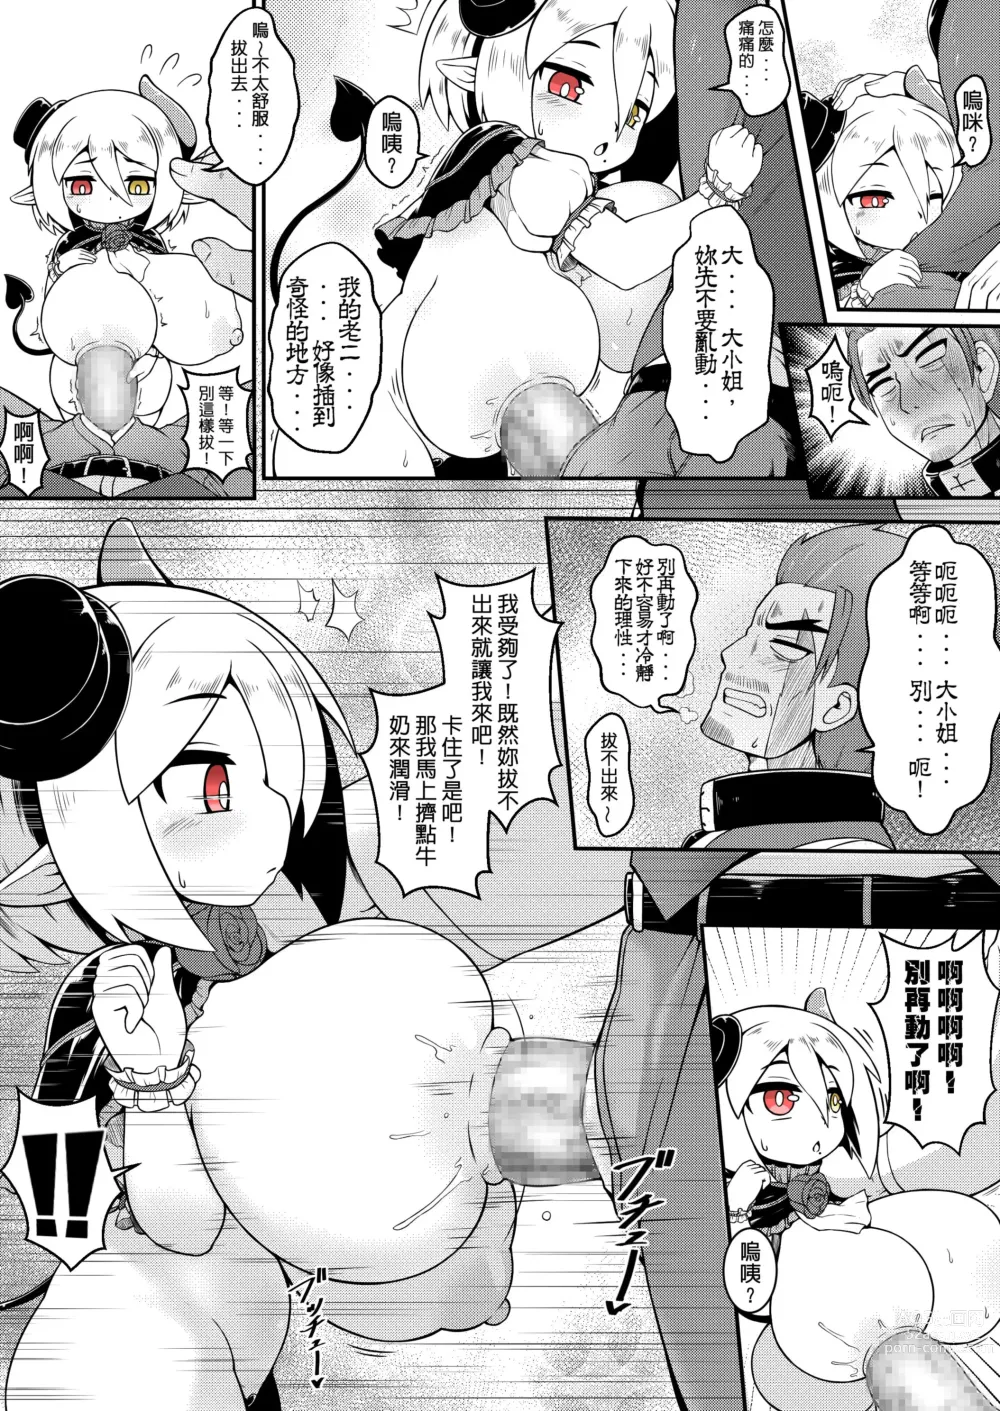 Page 20 of doujinshi Miss Rosalia who bought a slave who didnt like her Episode 1